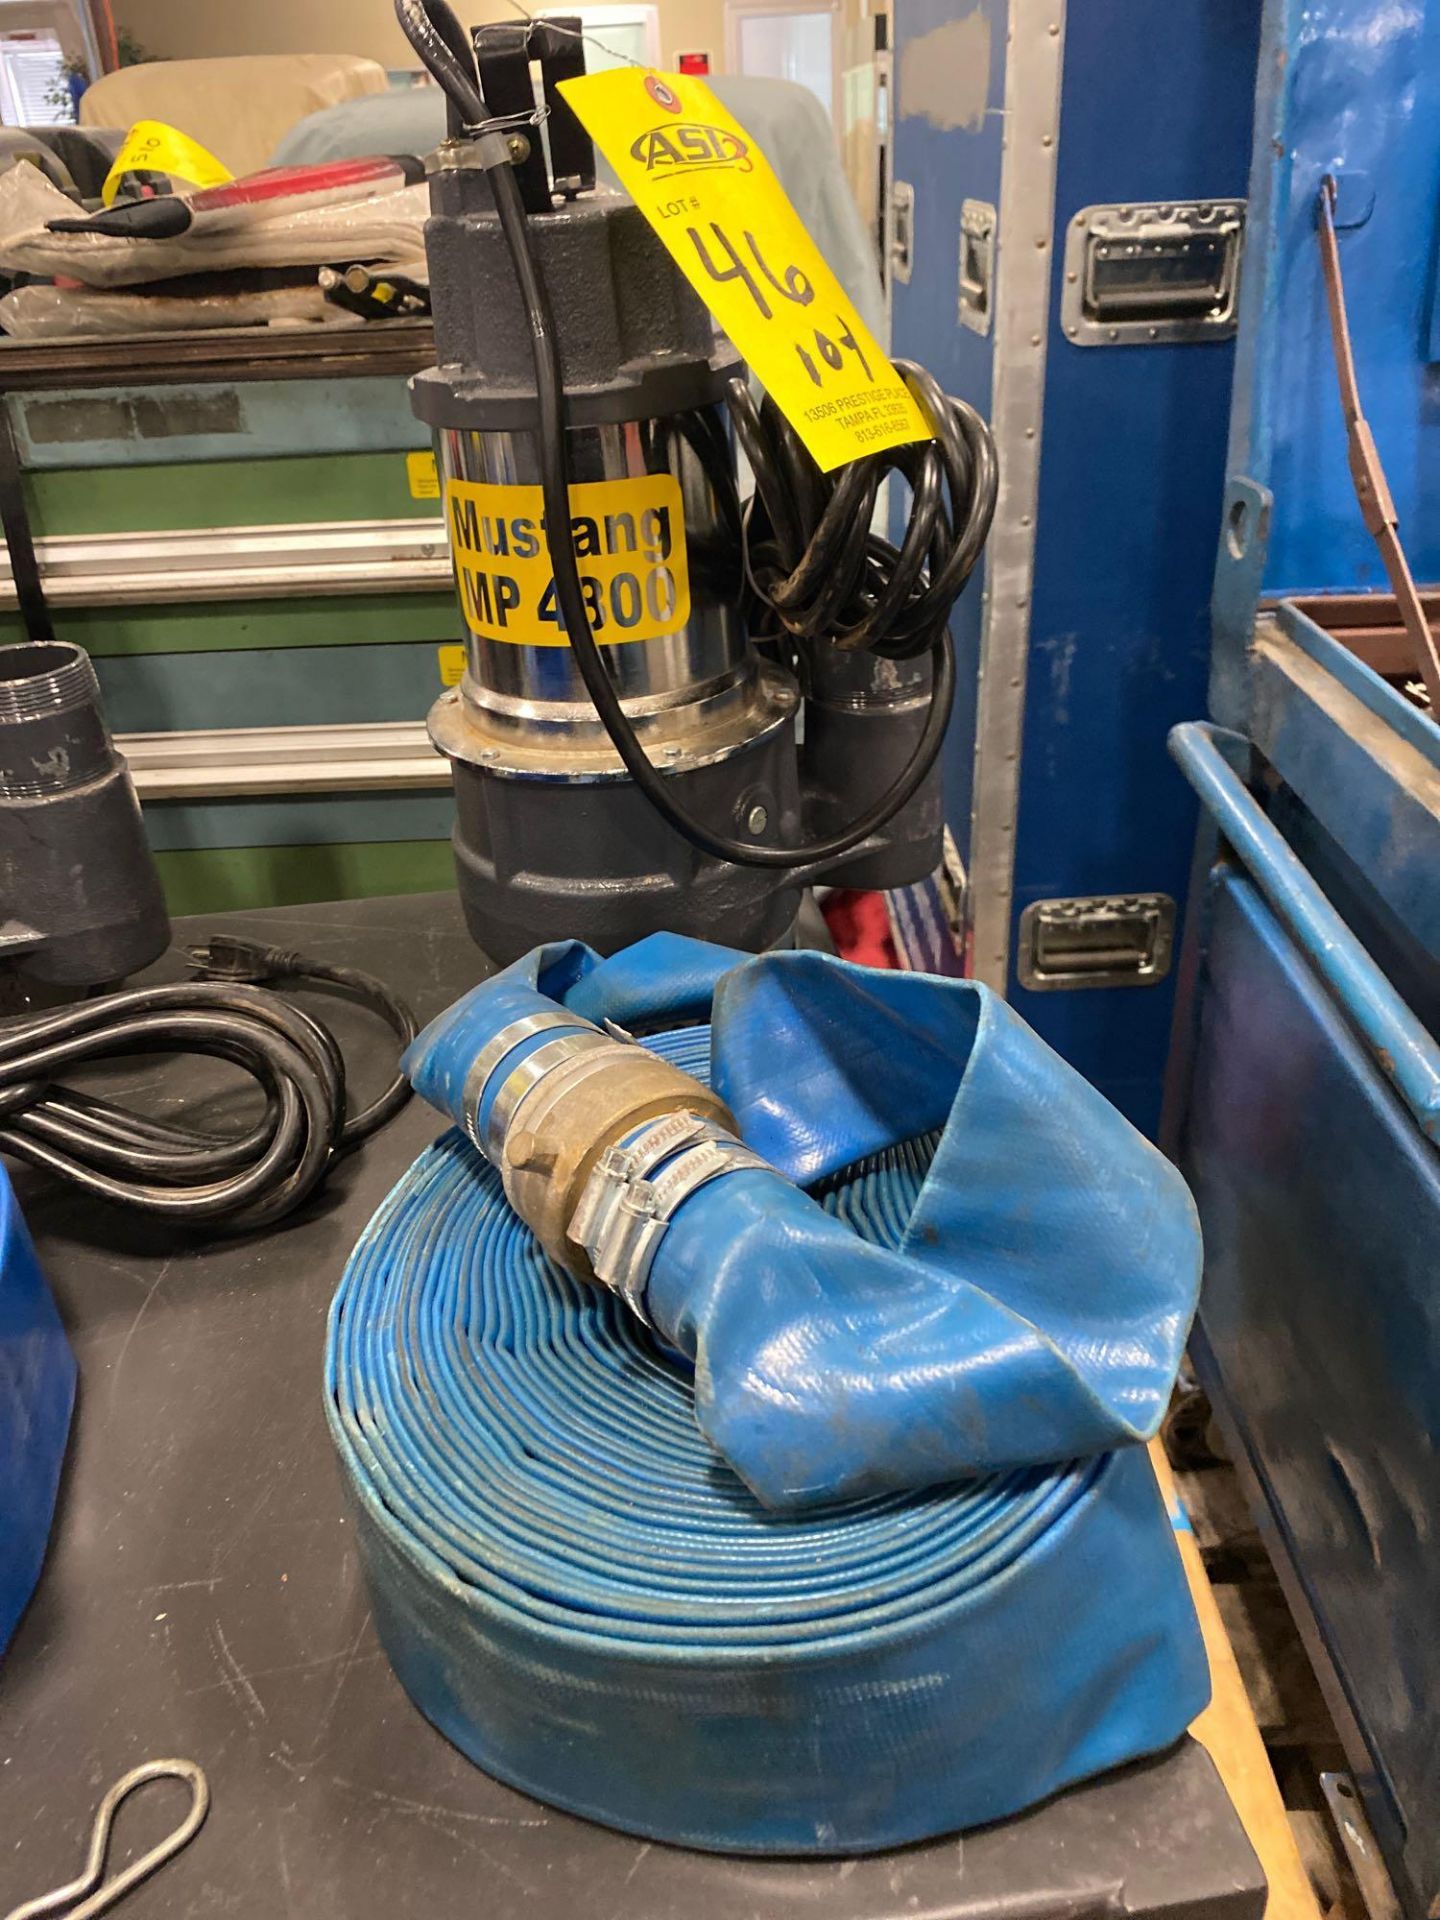 UNUSED MUSTANG MP4800 SUBMERSIBLE PUMP WITH HOSE